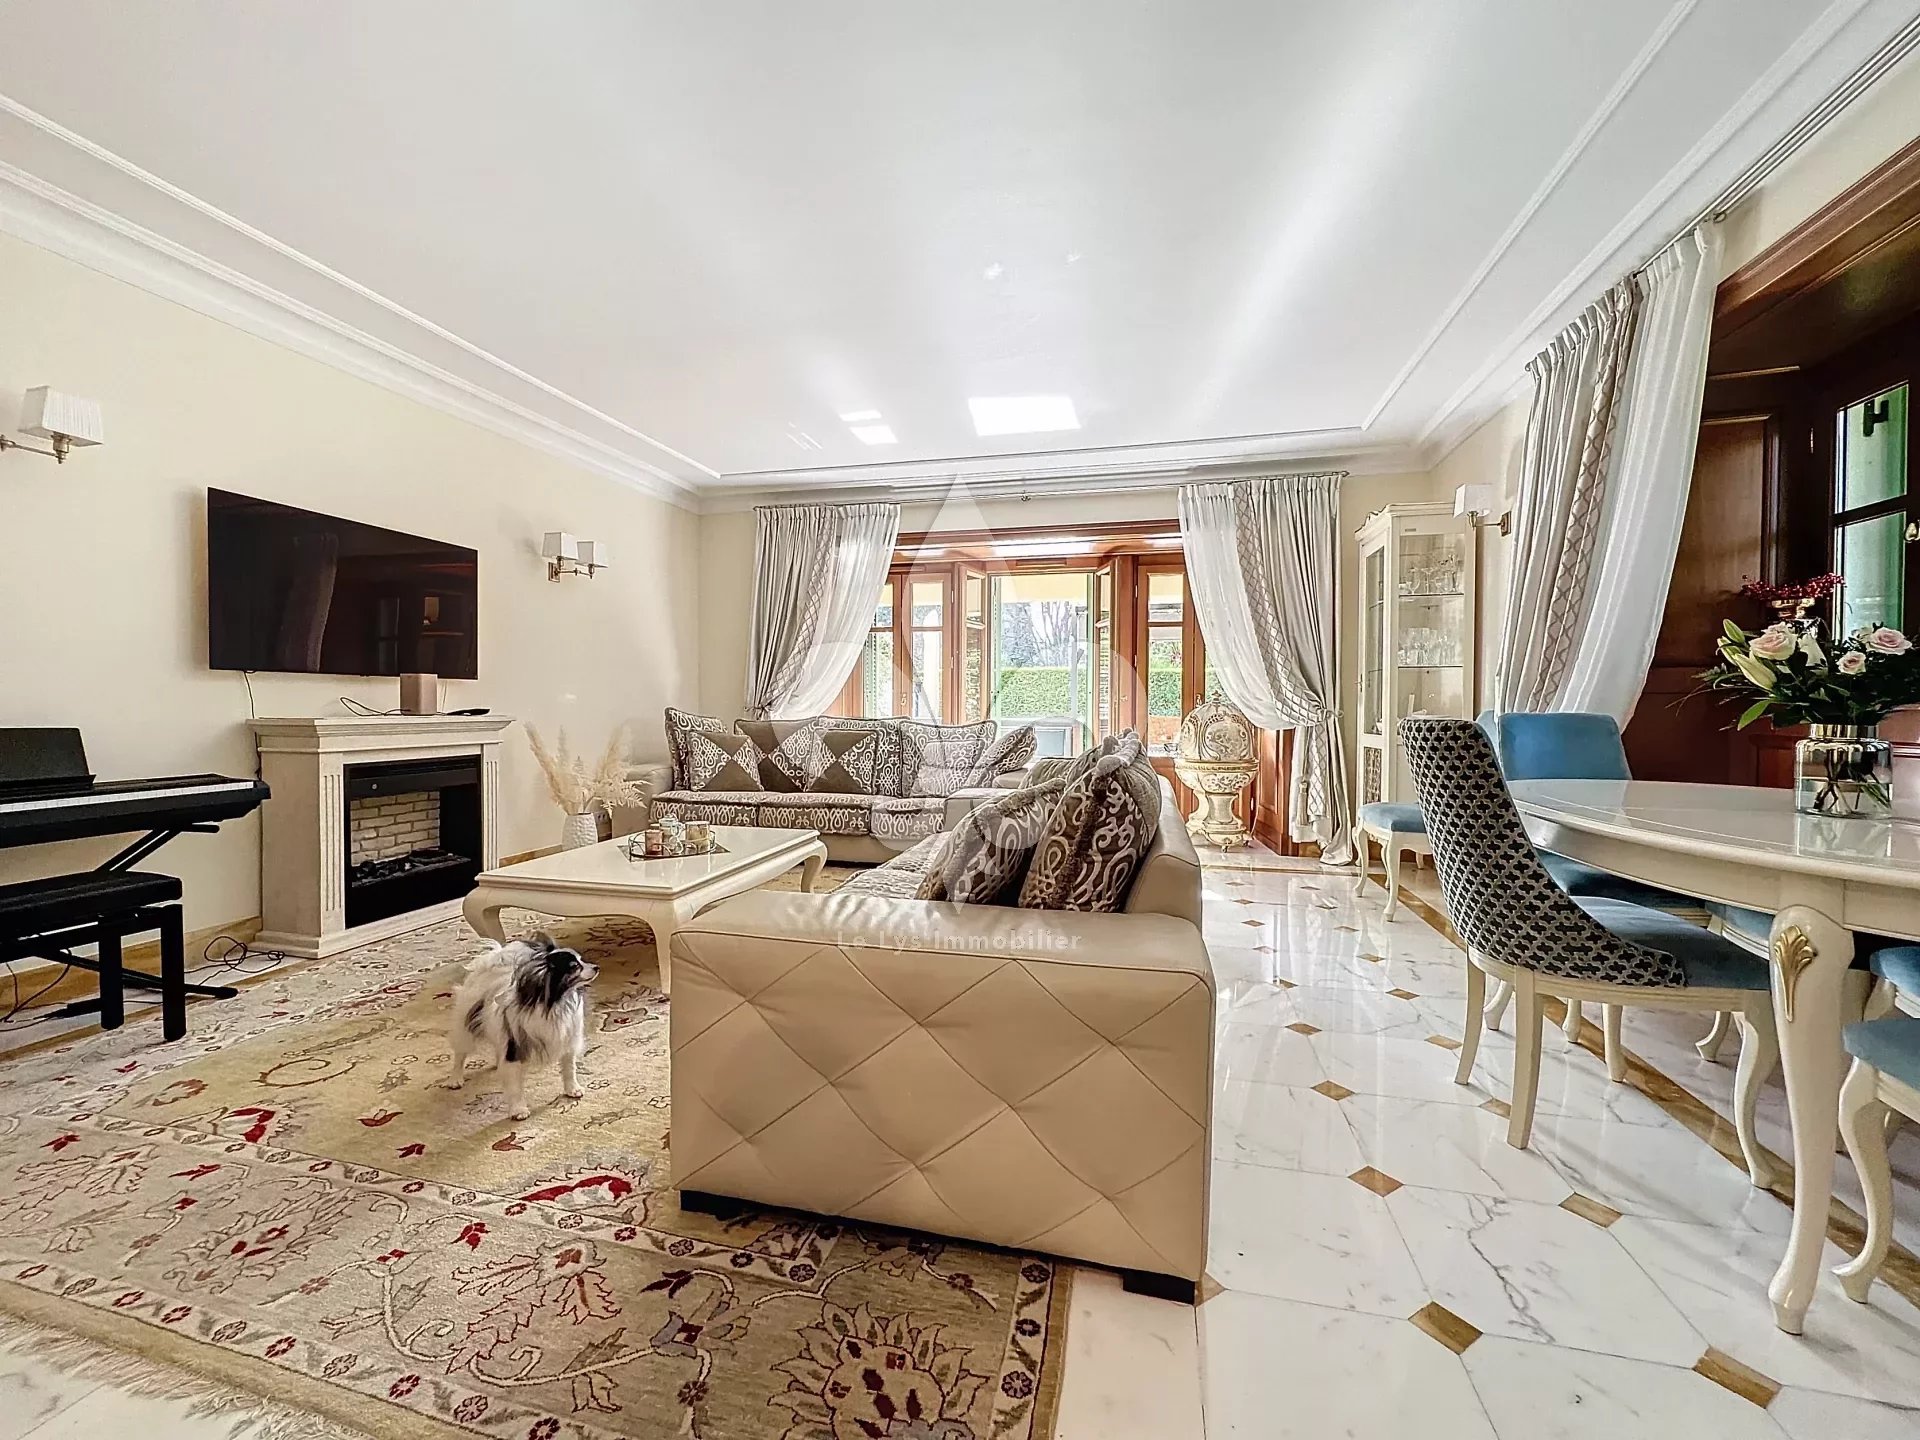 Cannes - Oxford: Magnificent ground floor apartment in a luxury residence